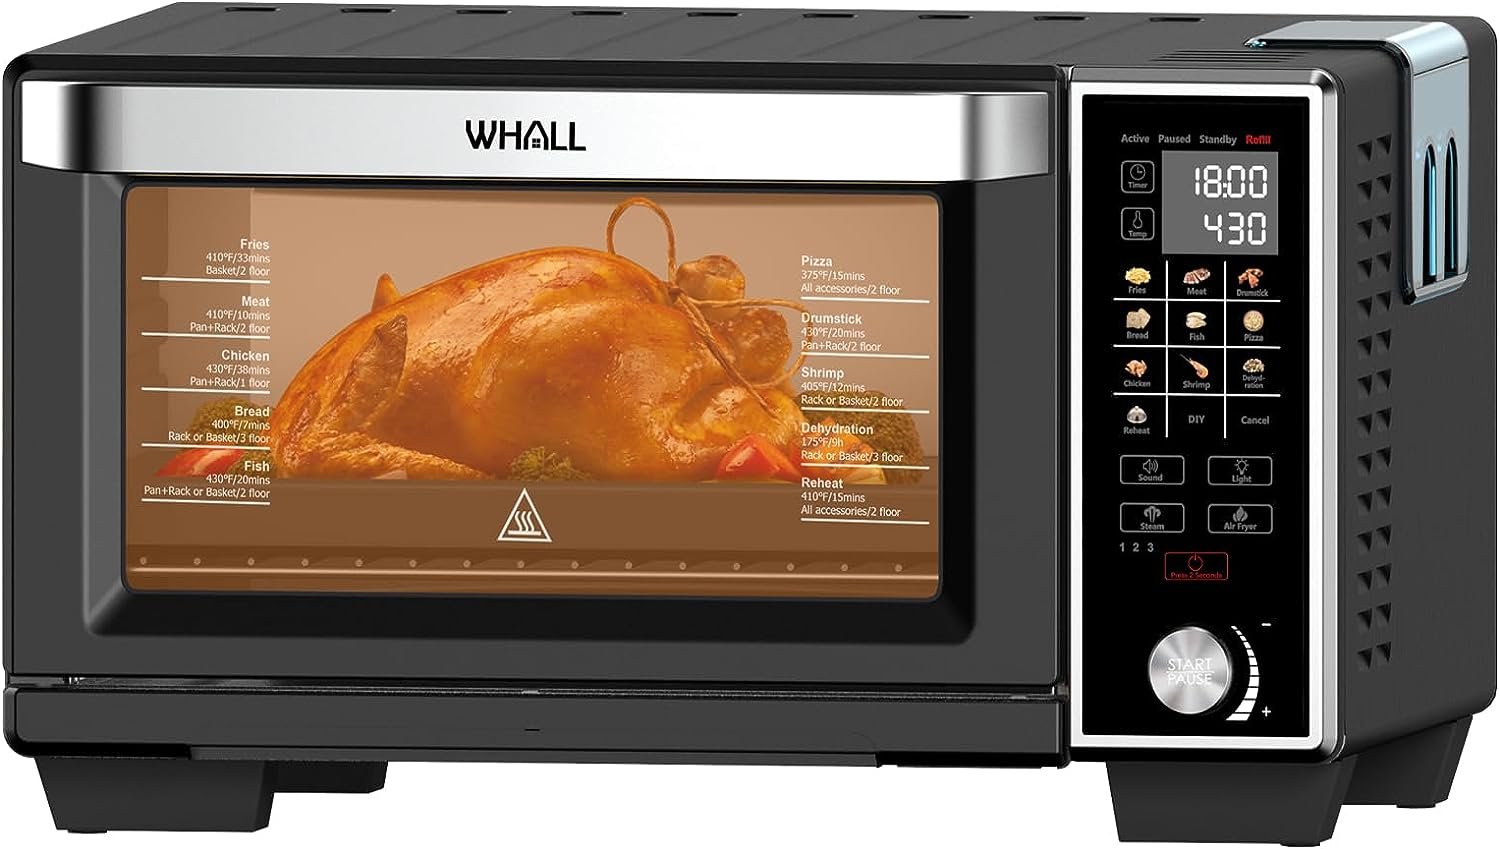 WHALL Toaster Oven Air Fryer, Max XL Large 30-Quart Smart Oven,11-in-1 Toaster Oven Countertop with Steam Function,12-inch Pizza,6 slices of Toast, 4 Accessories Included, Stainless Steel /1700W/BLACK